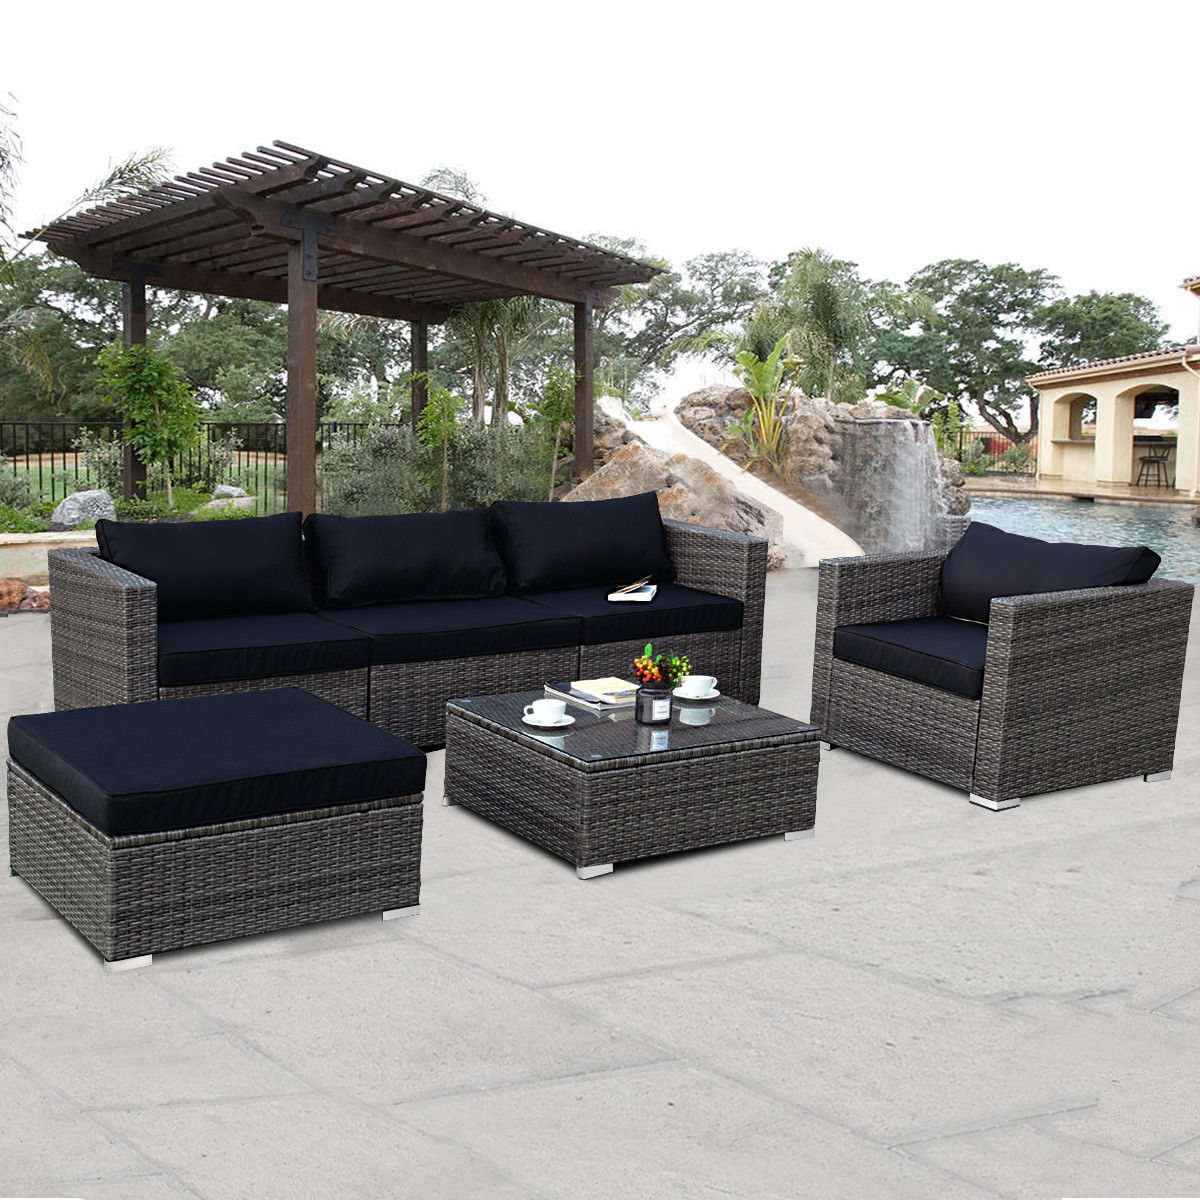 Costway 6 Piece Rattan Wicker Patio Furniture Set Sectional Sofa Couch Yard With Black Cushion Walmart throughout size 1200 X 1200